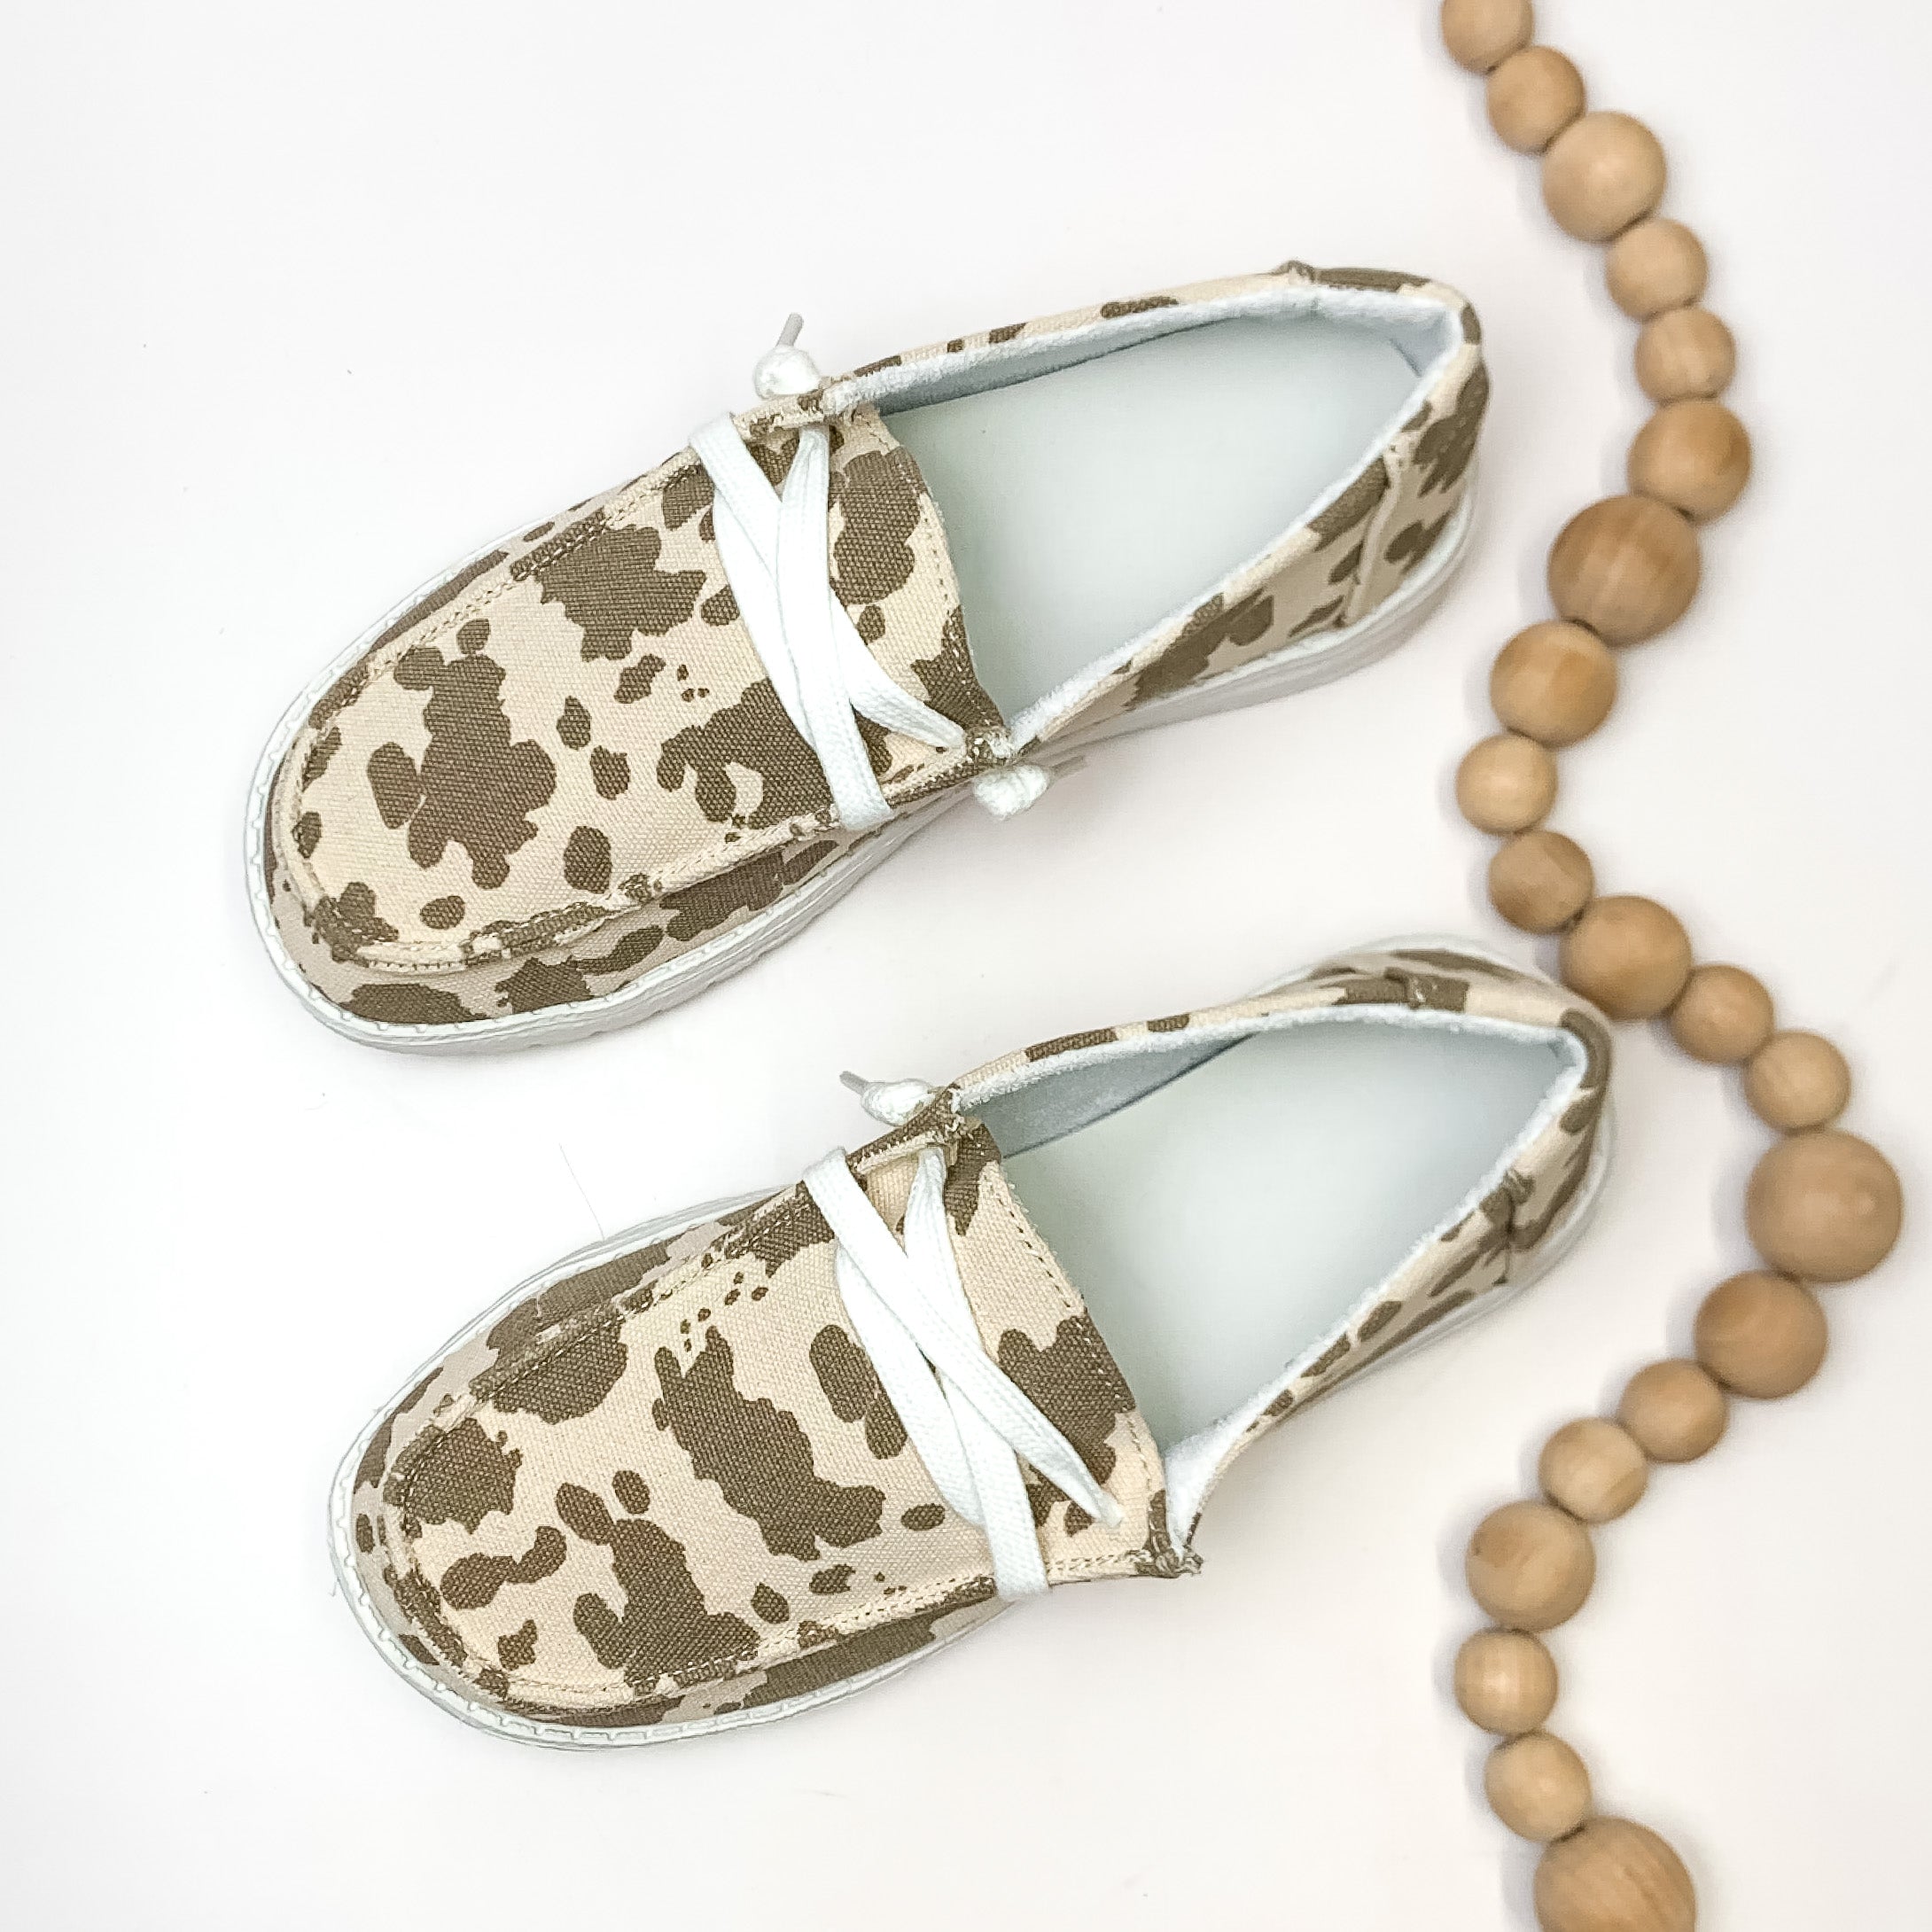 Very G | Have To Run Cow Print Slip On Loafers with Laces in Tan - Giddy Up Glamour Boutique